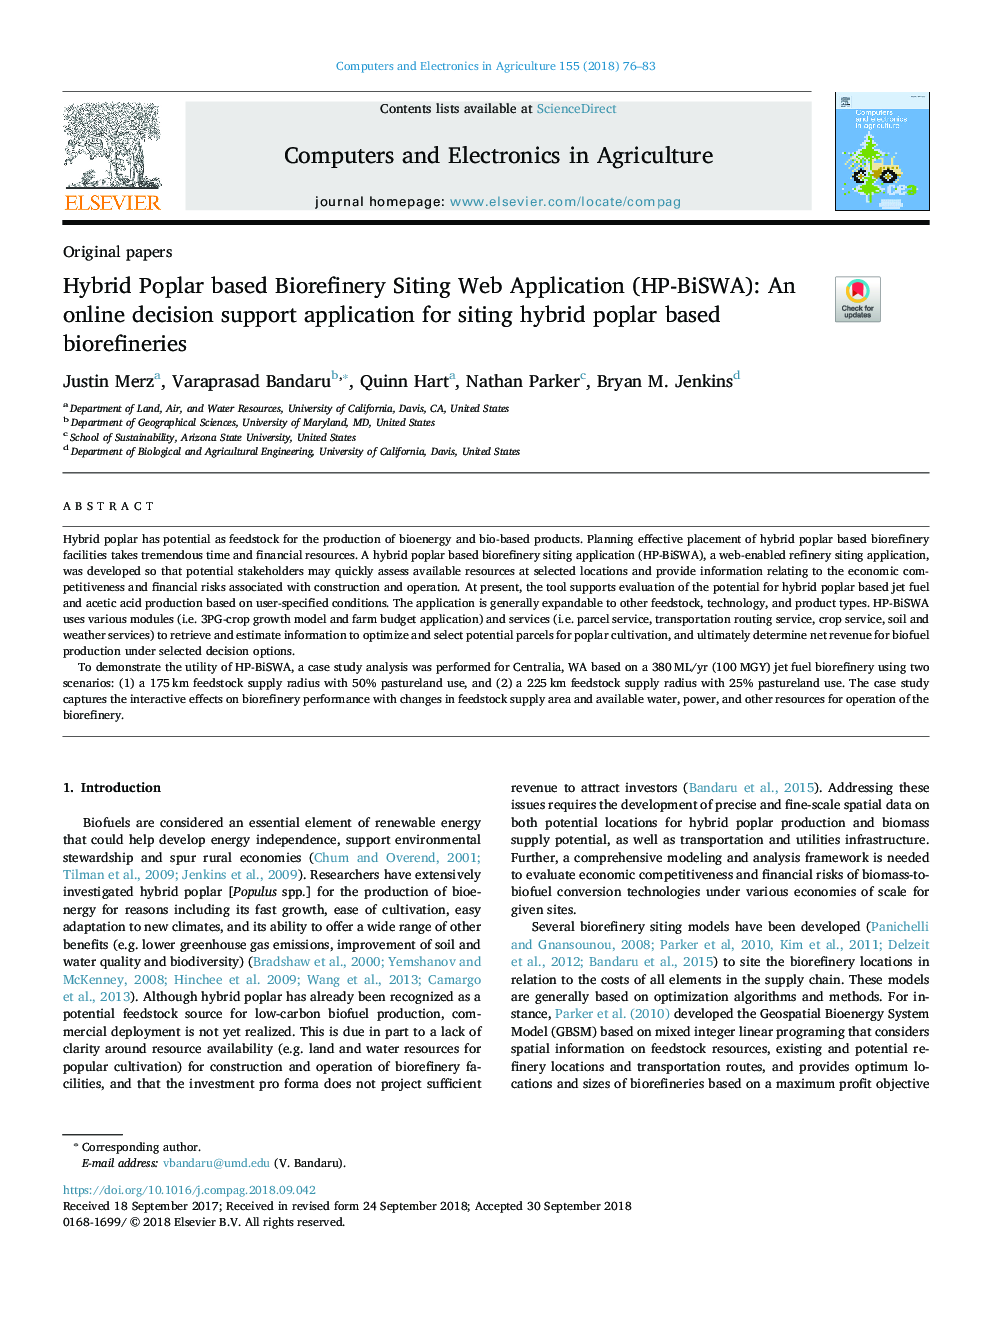 Hybrid Poplar based Biorefinery Siting Web Application (HP-BiSWA): An online decision support application for siting hybrid poplar based biorefineries